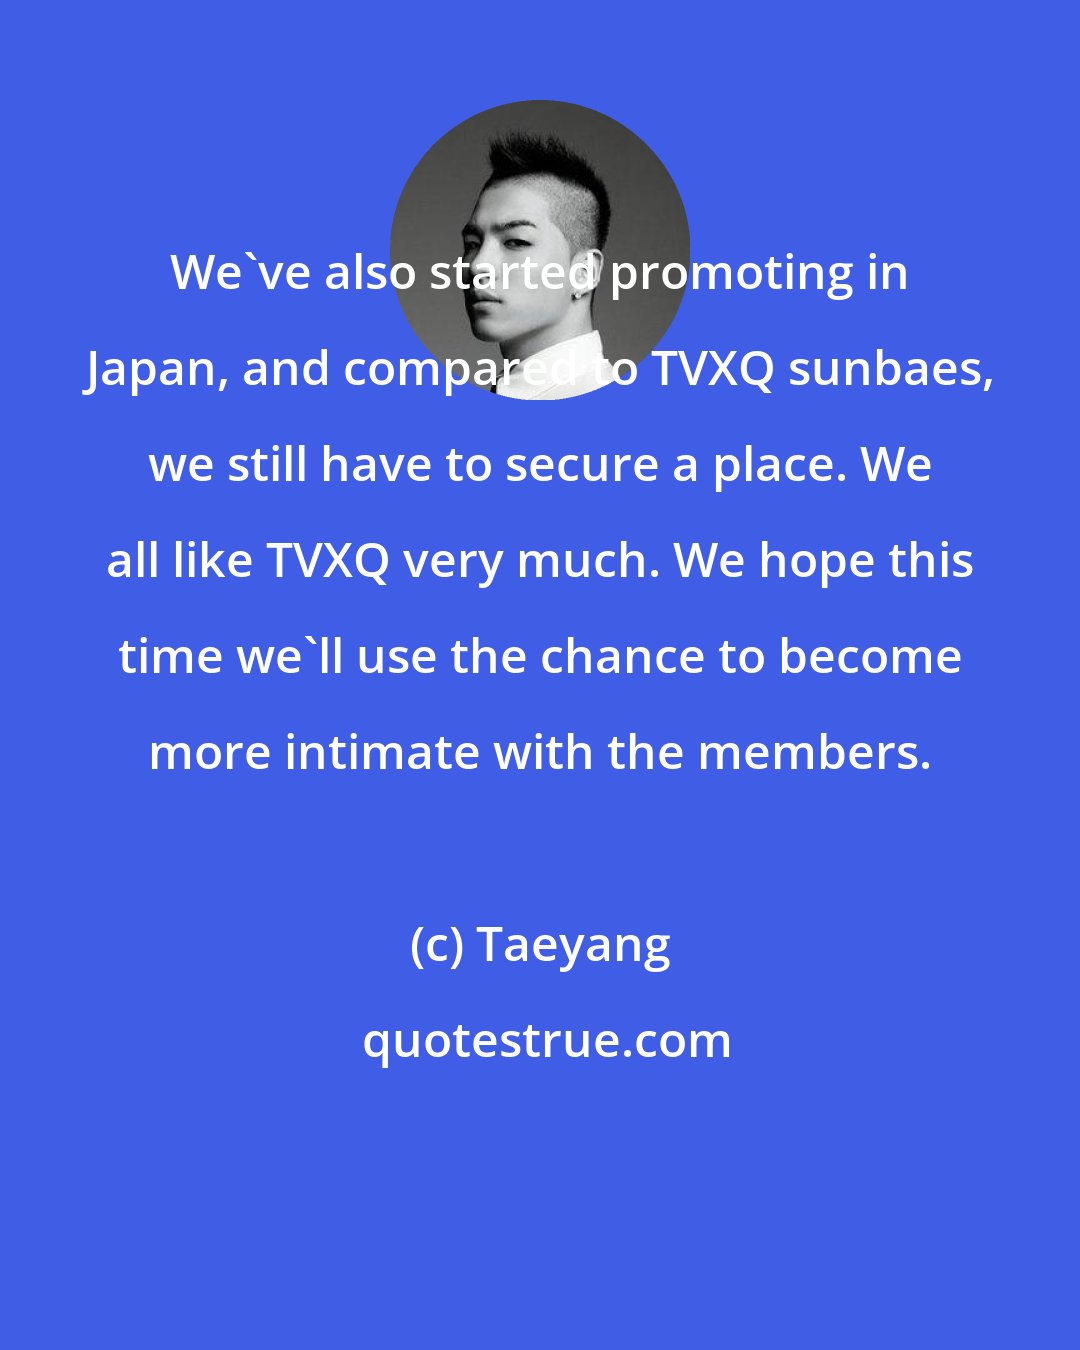 Taeyang: We've also started promoting in Japan, and compared to TVXQ sunbaes, we still have to secure a place. We all like TVXQ very much. We hope this time we'll use the chance to become more intimate with the members.